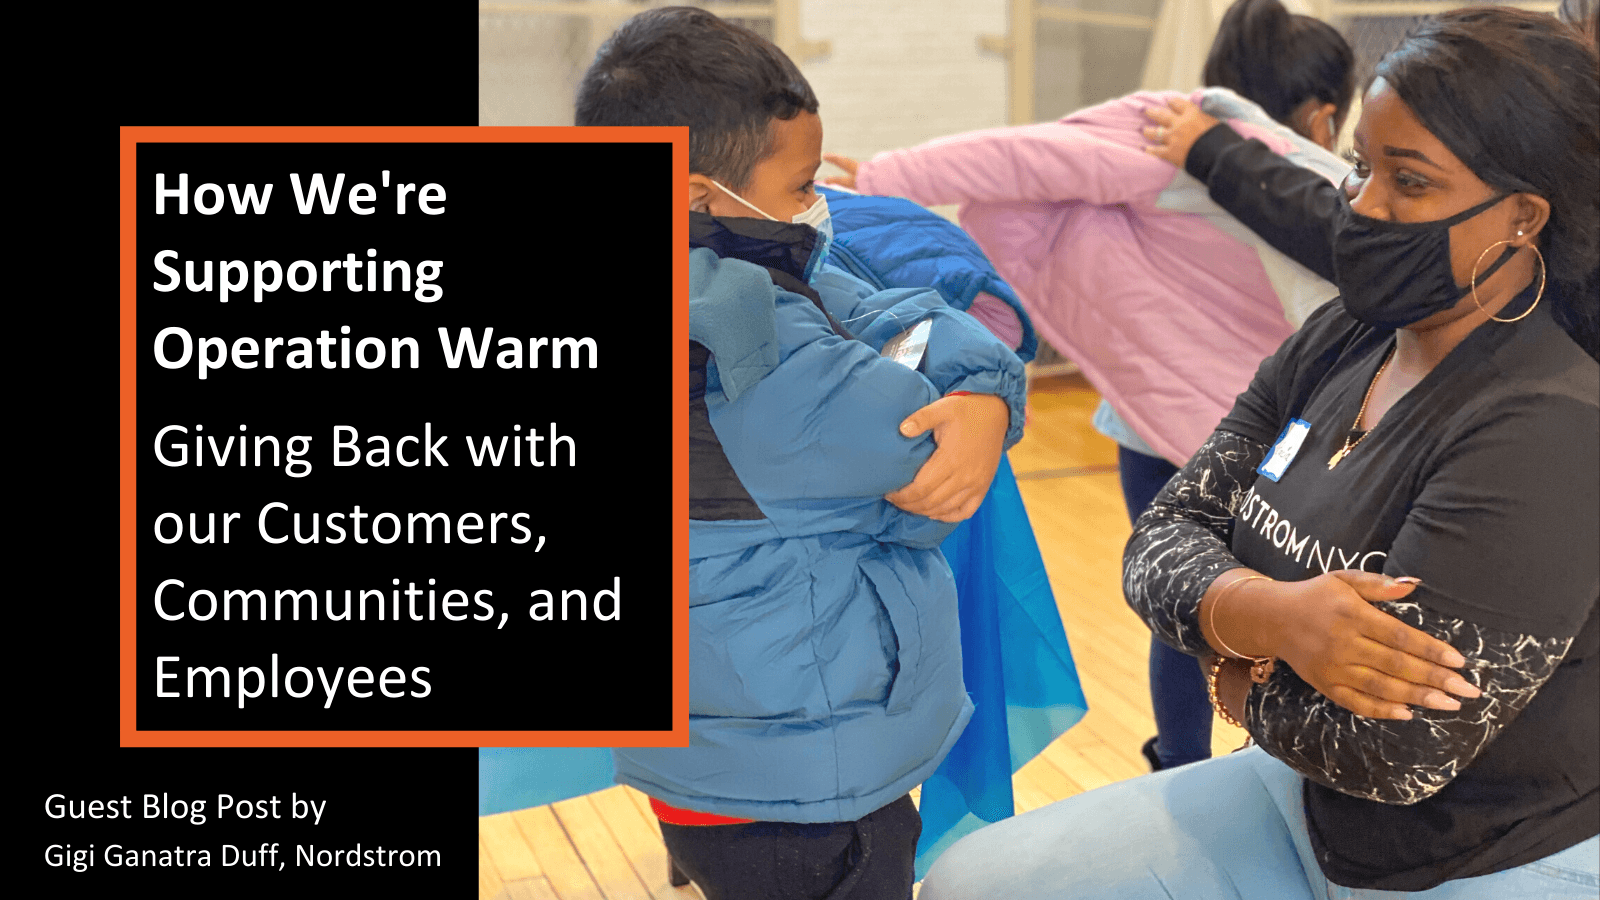 How we’re supporting Operation Warm - Giving Back with our Customers, Communities, and Employees